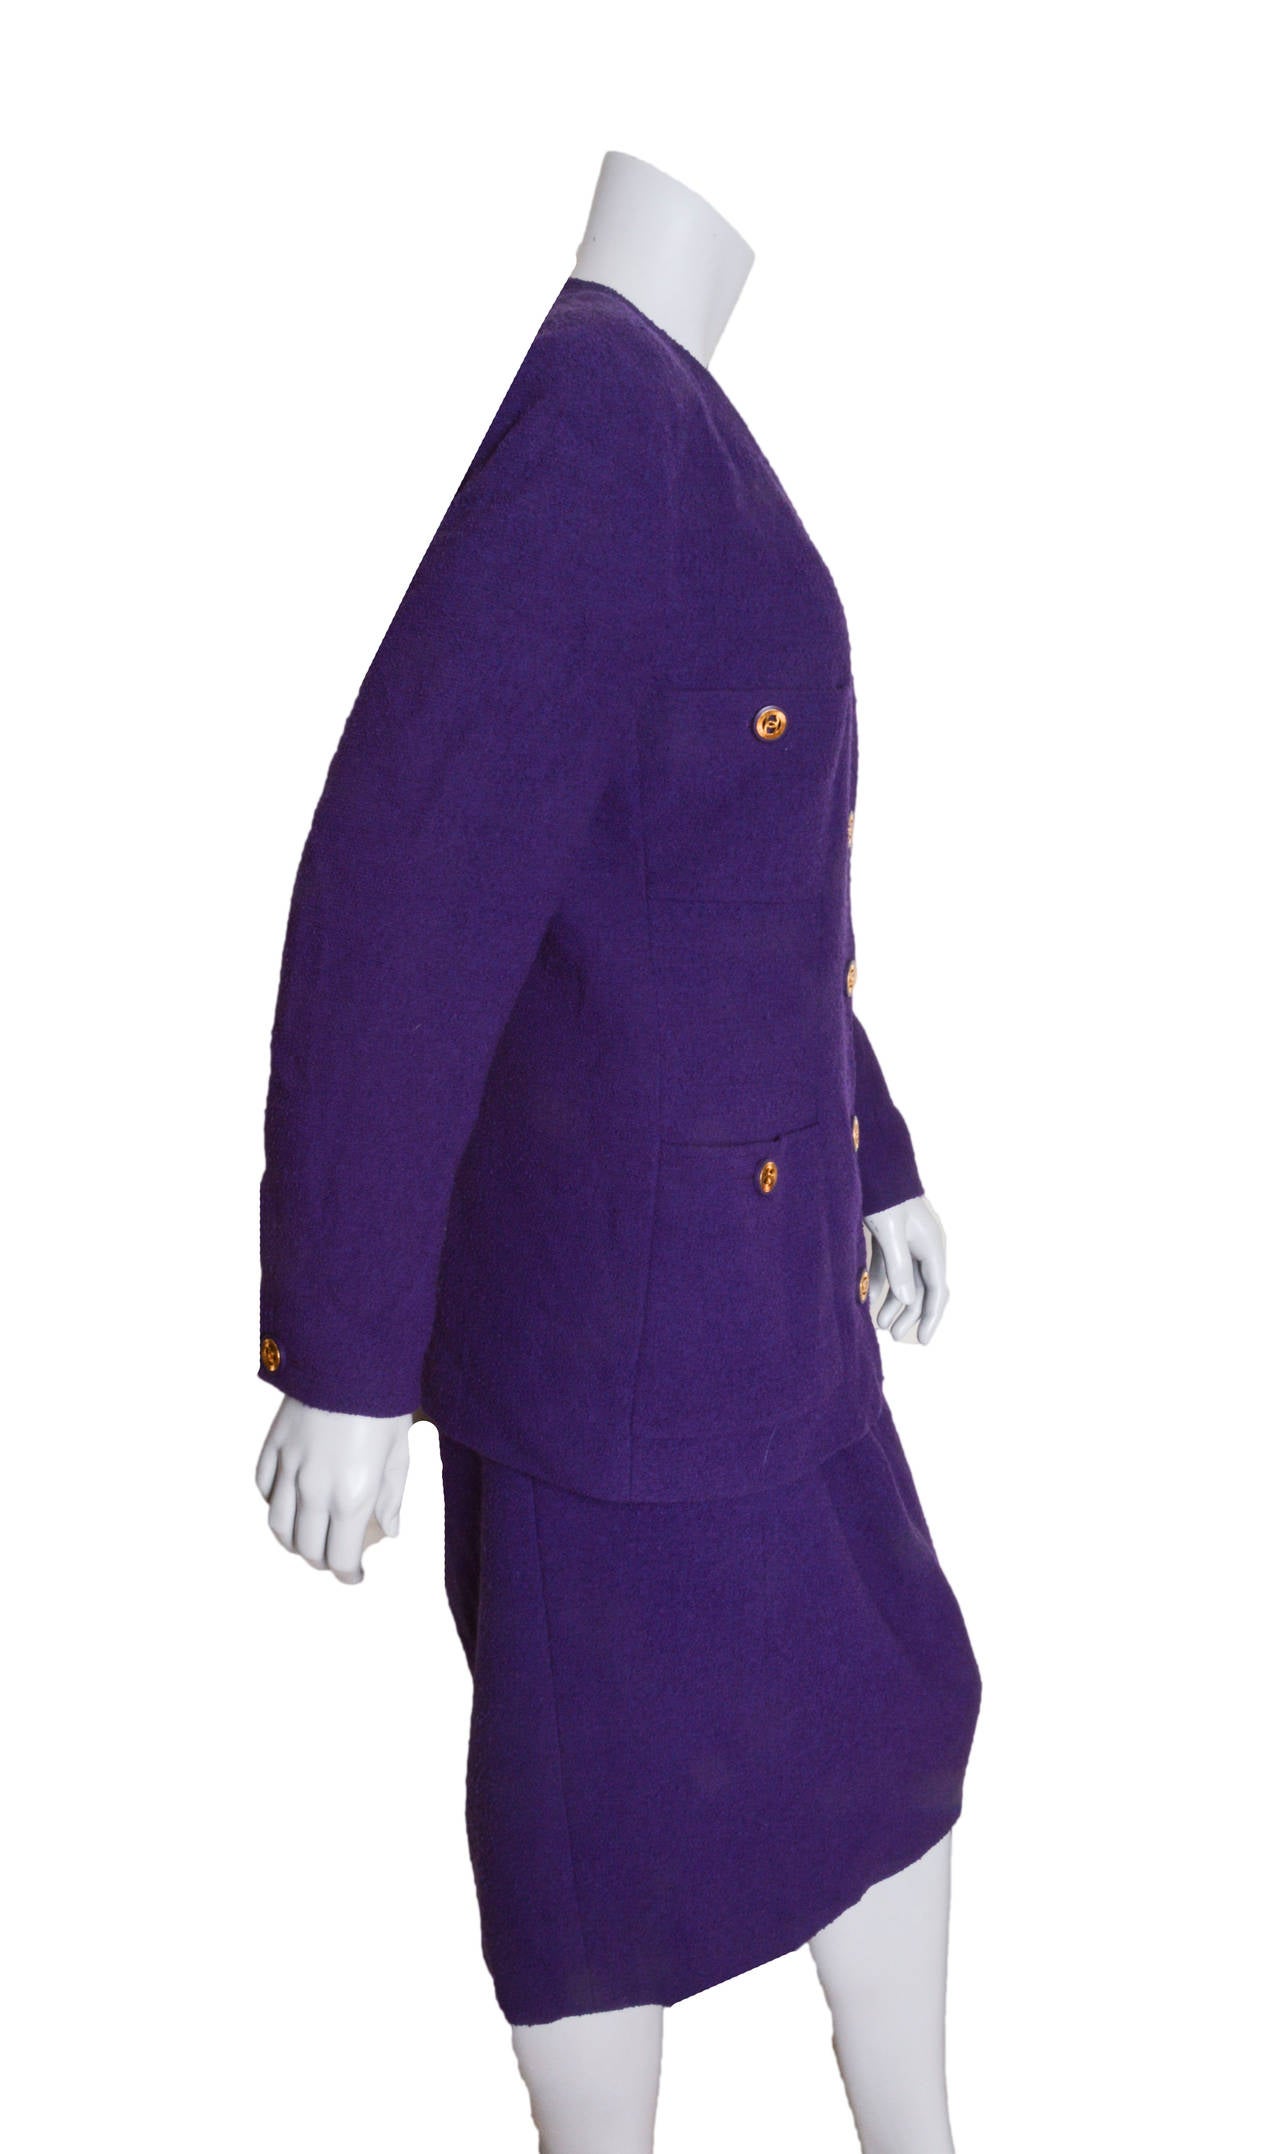 Iconic vintage Chanel Boutique purple boucle skirt suit.
Gorgeous vibrant purple wool nylon blend.
Lined in silk throughout.

Handwritten on tag:
Collection: 26
Style: 20919
Size 44

Jacket features classic four pockets.
Cc logo embossed